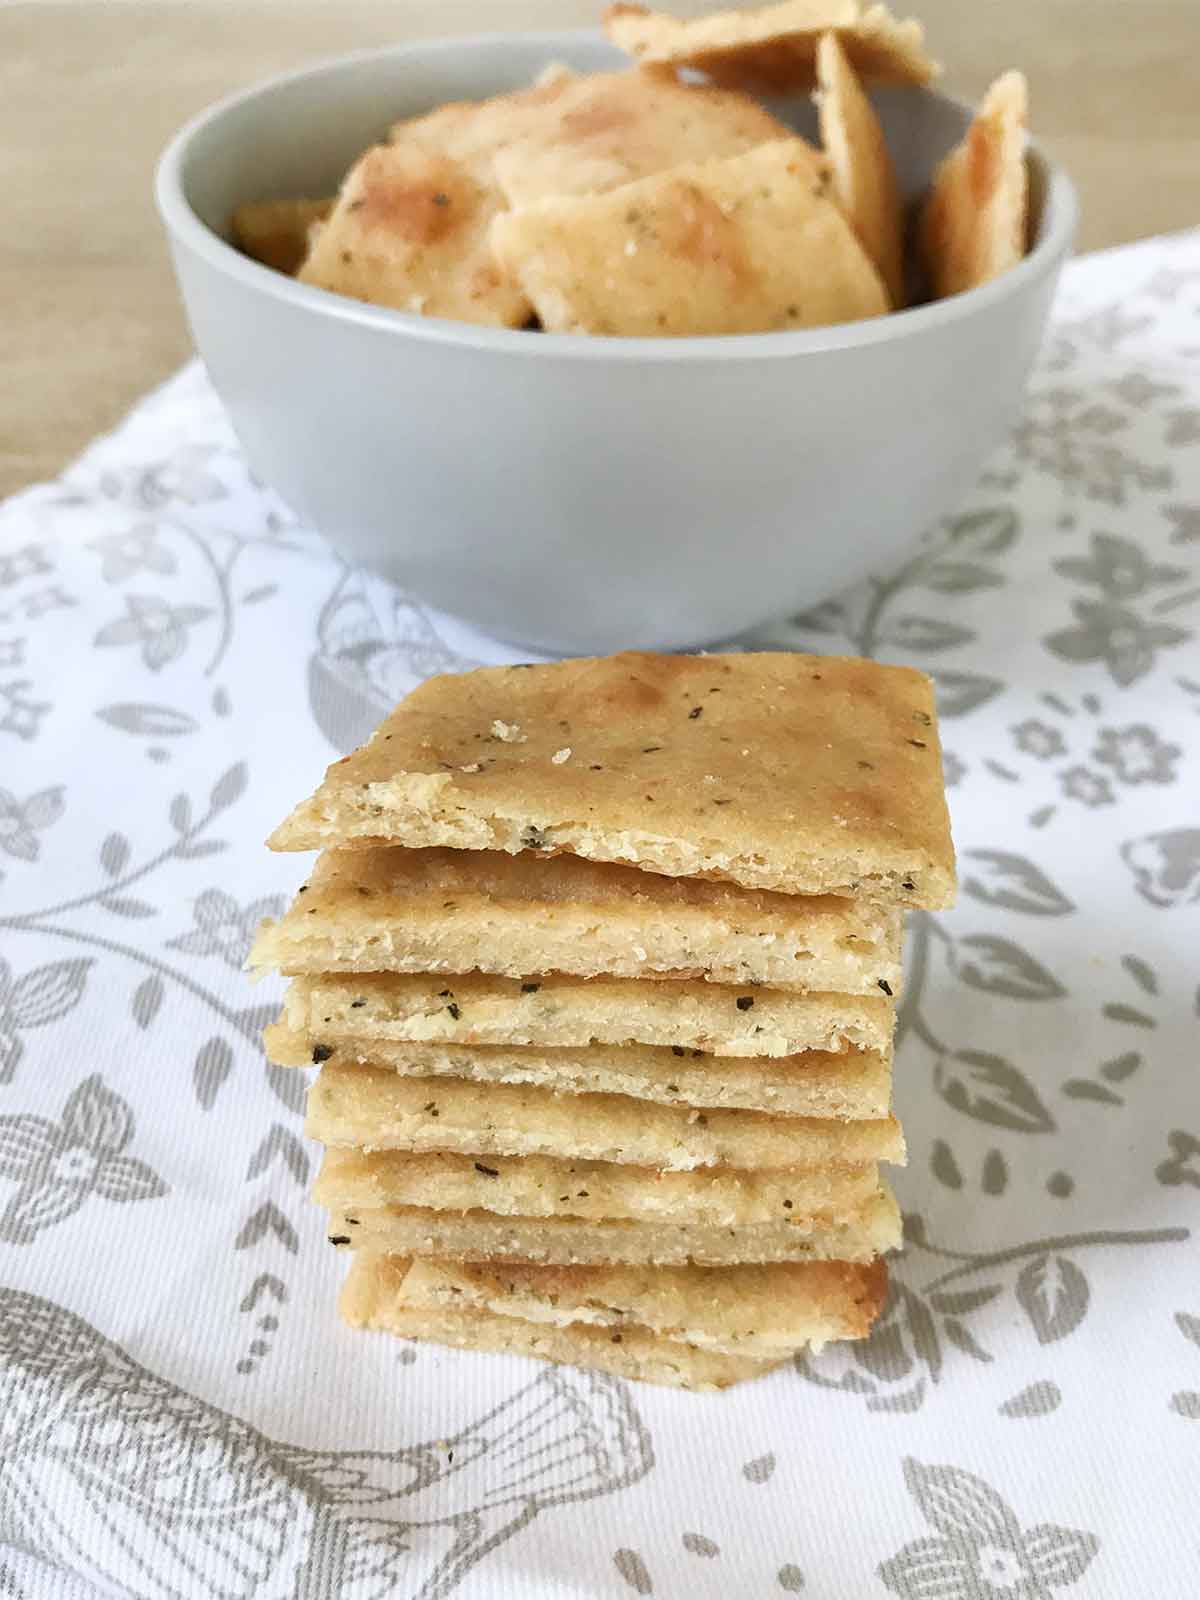 Gluten free cheese crackers on top of each others.